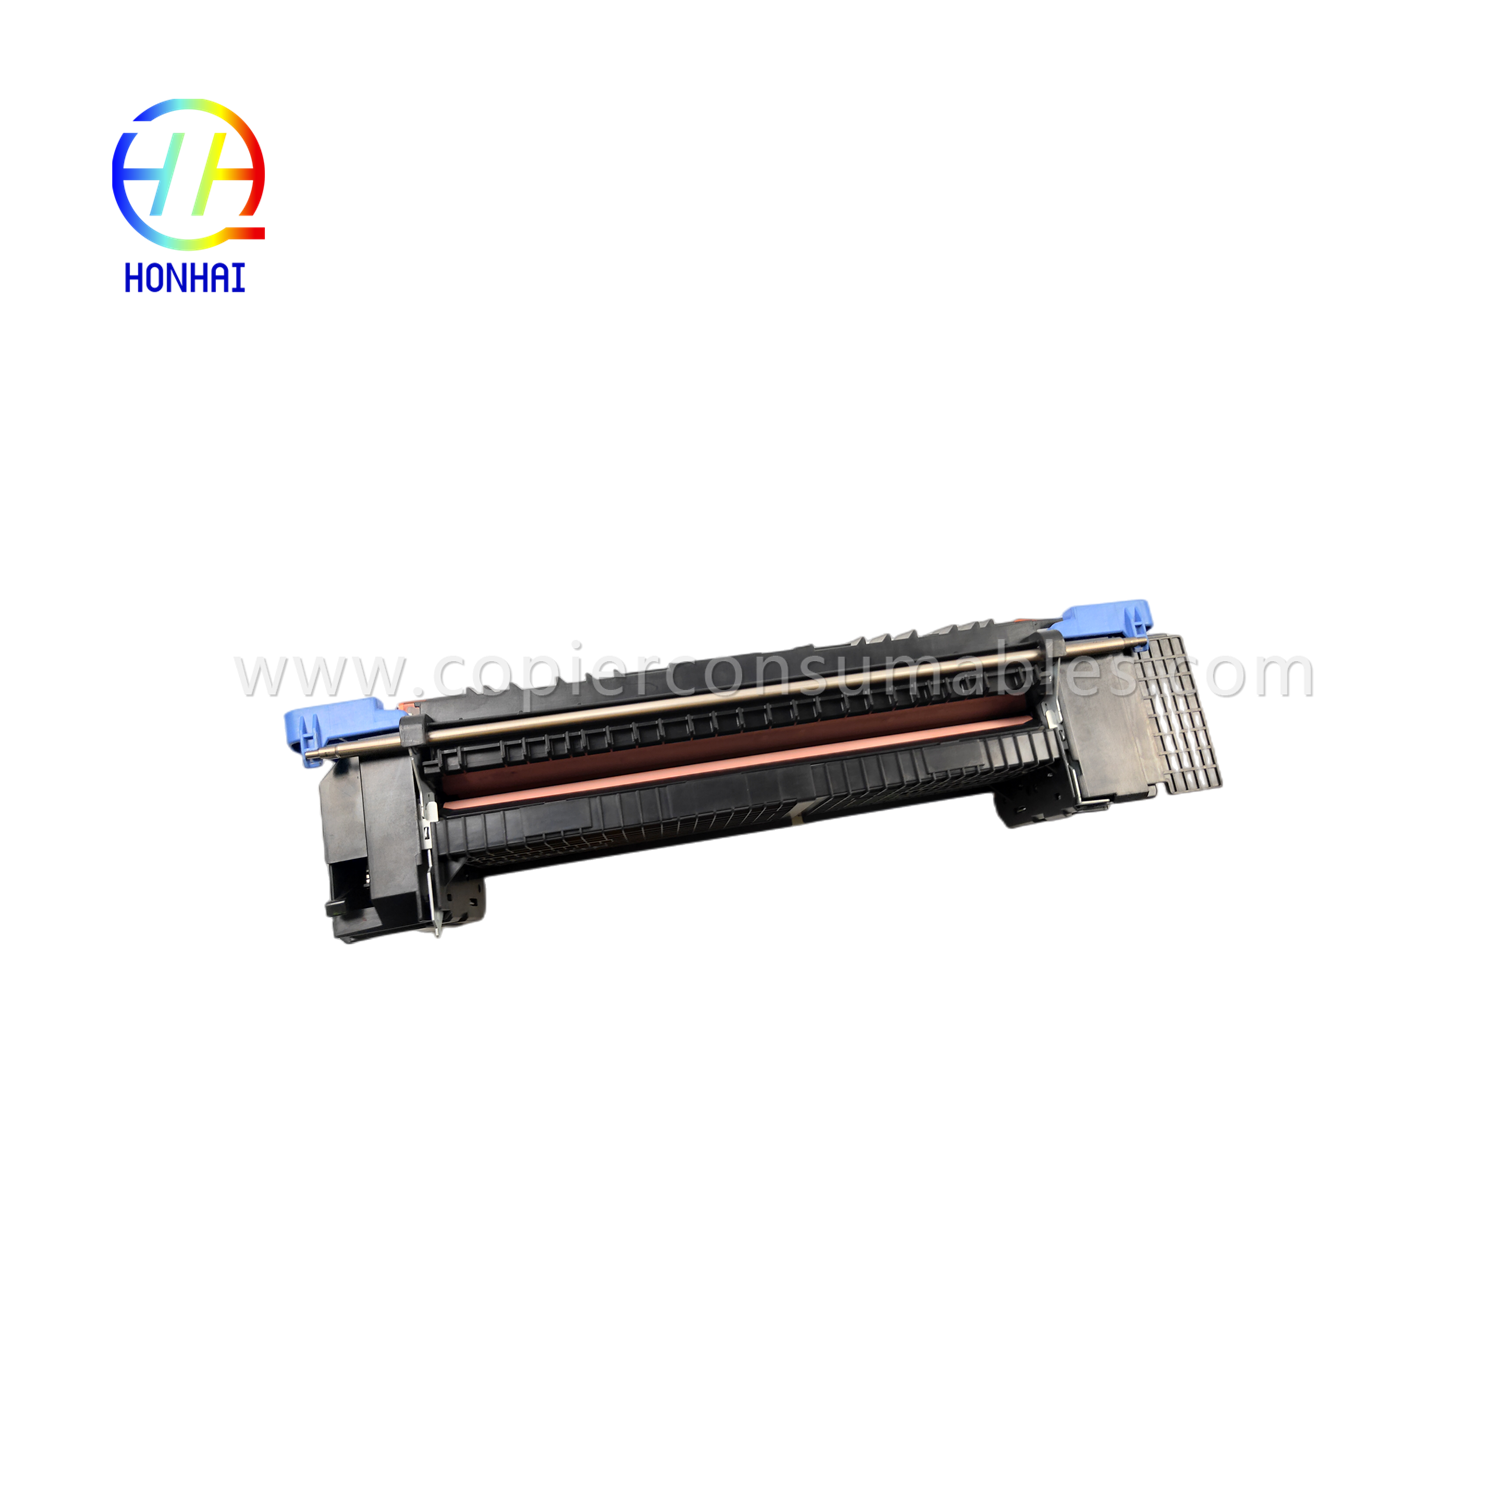 https://www.copierconsumables.com/fuser-assembly-unit-for-hp-m855-m880-m855dn-m855xh-m880z-m880z-c1n54-67901-c1n58-67901-fusing-heating-proxing/